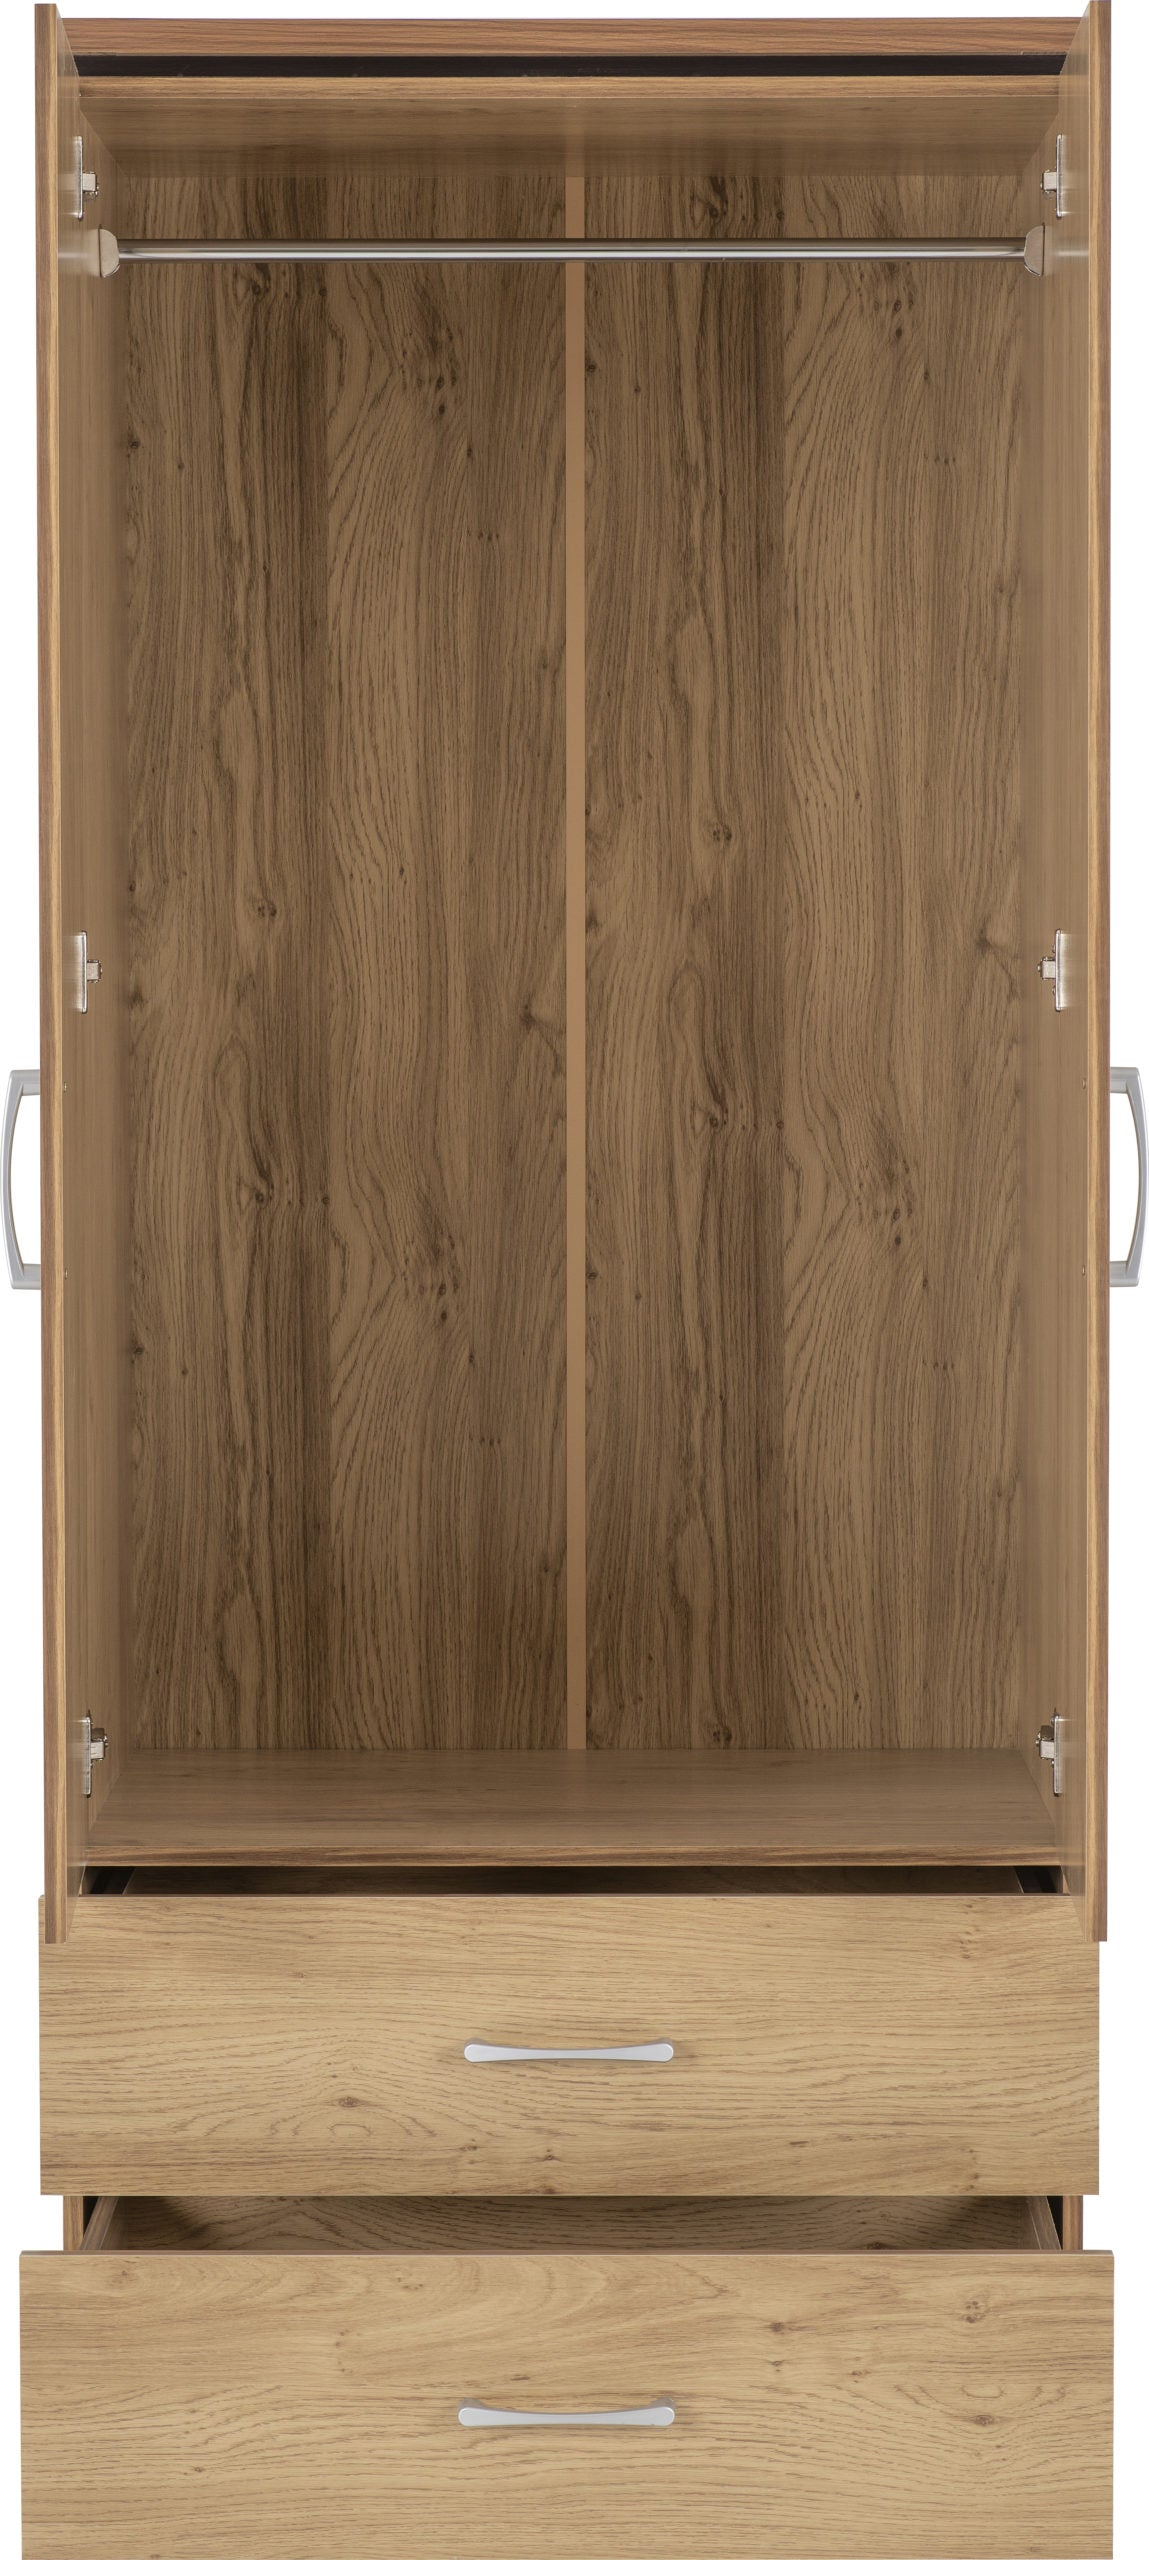 Charles 2 Door 2 Drawer Wardrobe - The Right Buy Store